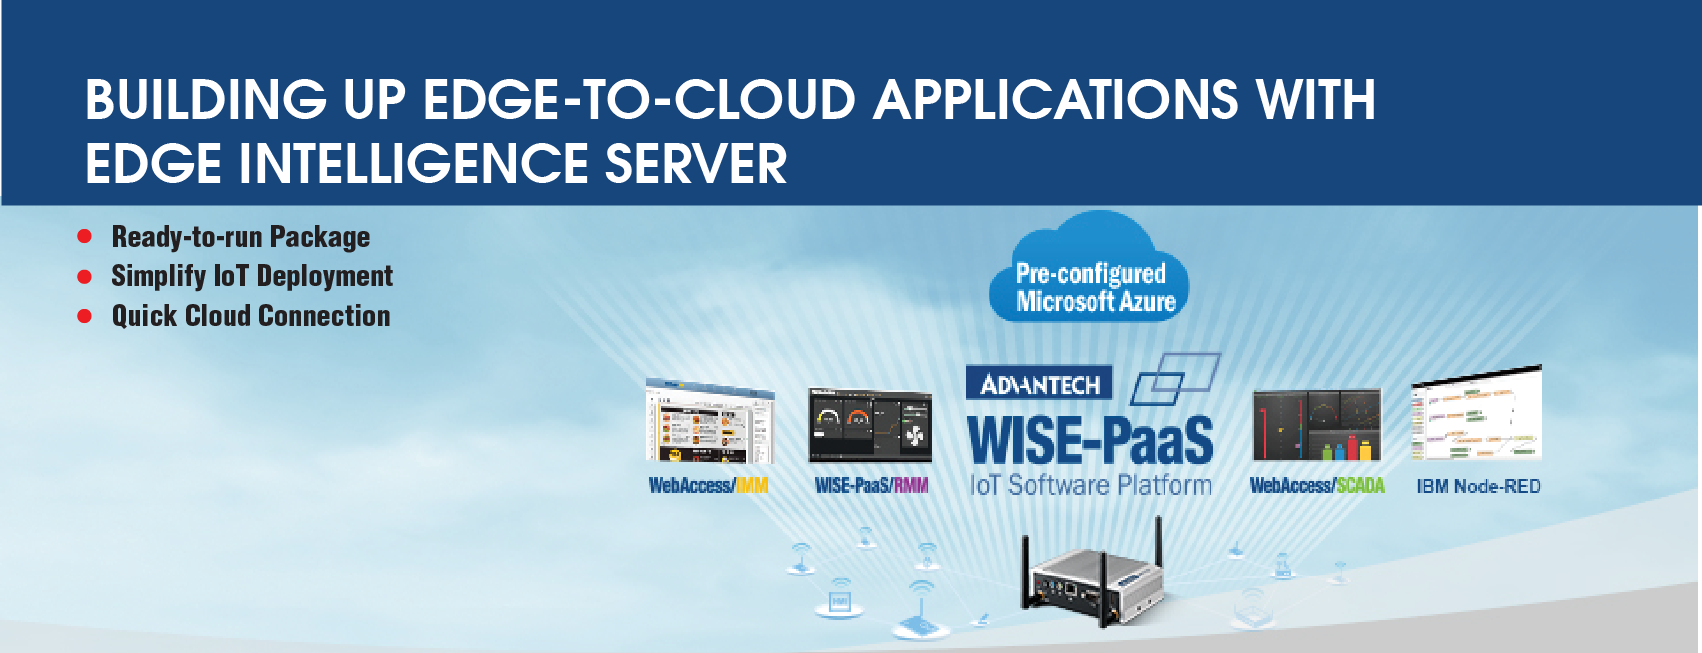 Building Up Edge-to-Cloud Applications with Edge Intelligence Server  